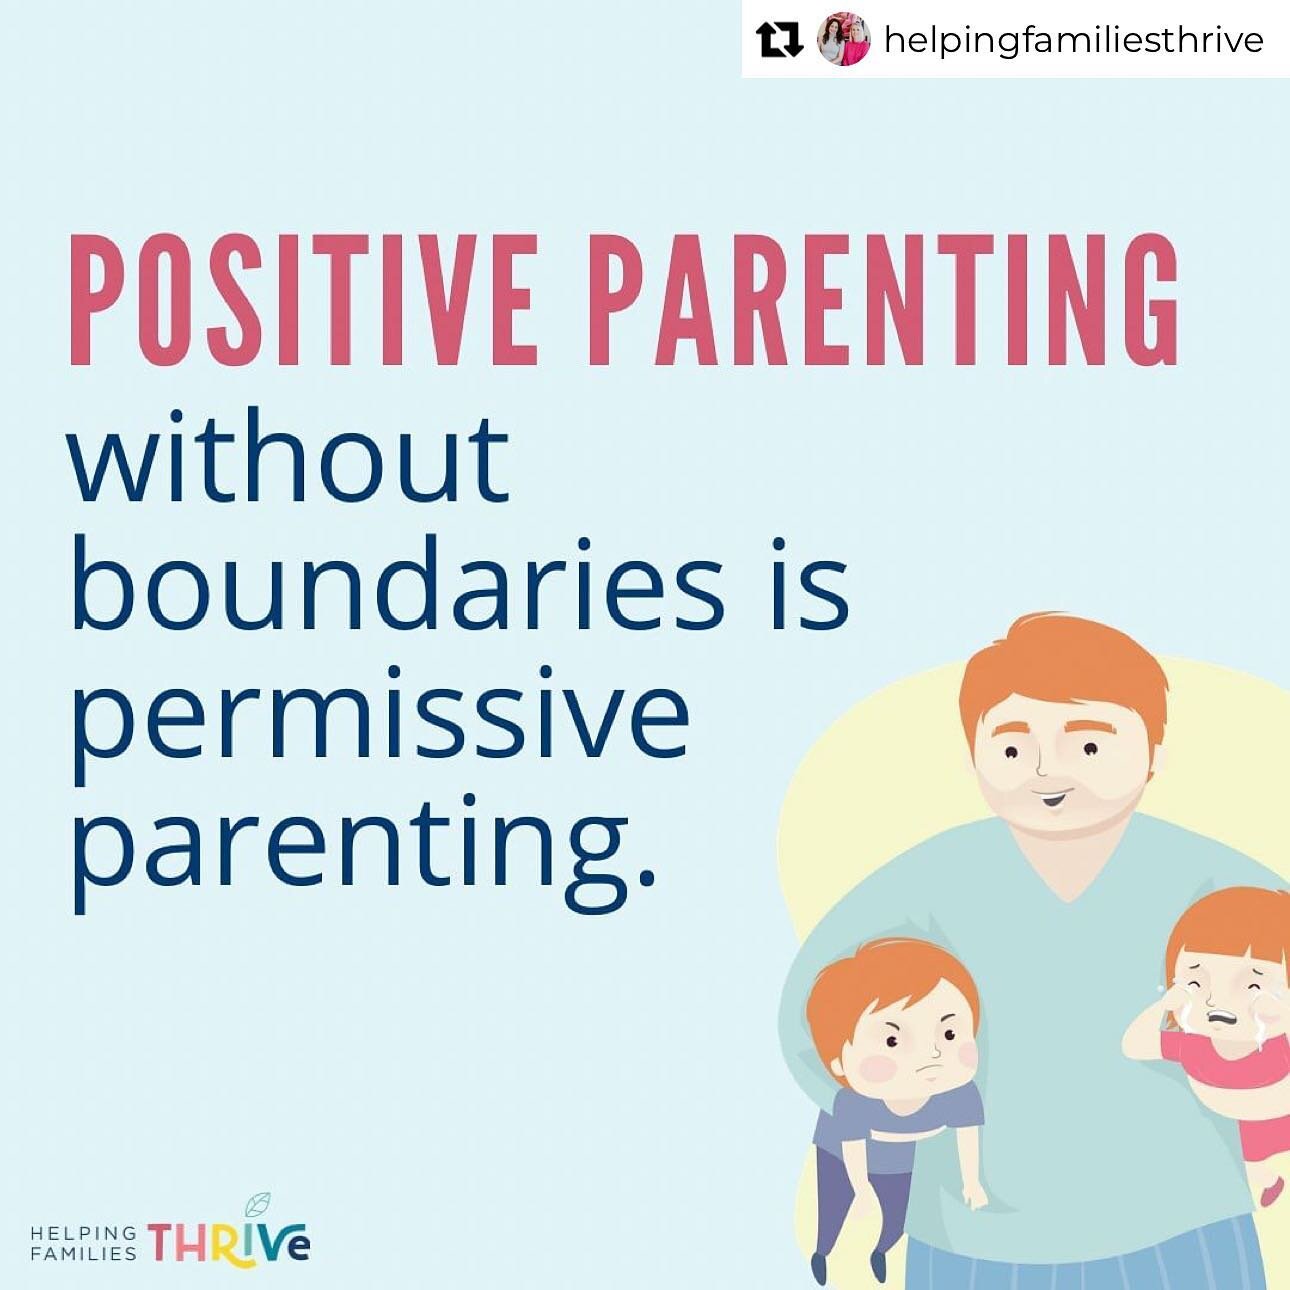 Repost from @helpingfamiliesthrive
&bull;
Sometimes in our attempts to be positive with our kids (a good thing!), we begin to feel bad about setting limits. Often this is because boundaries can make our kids upset, which is hard for us as parents. 

